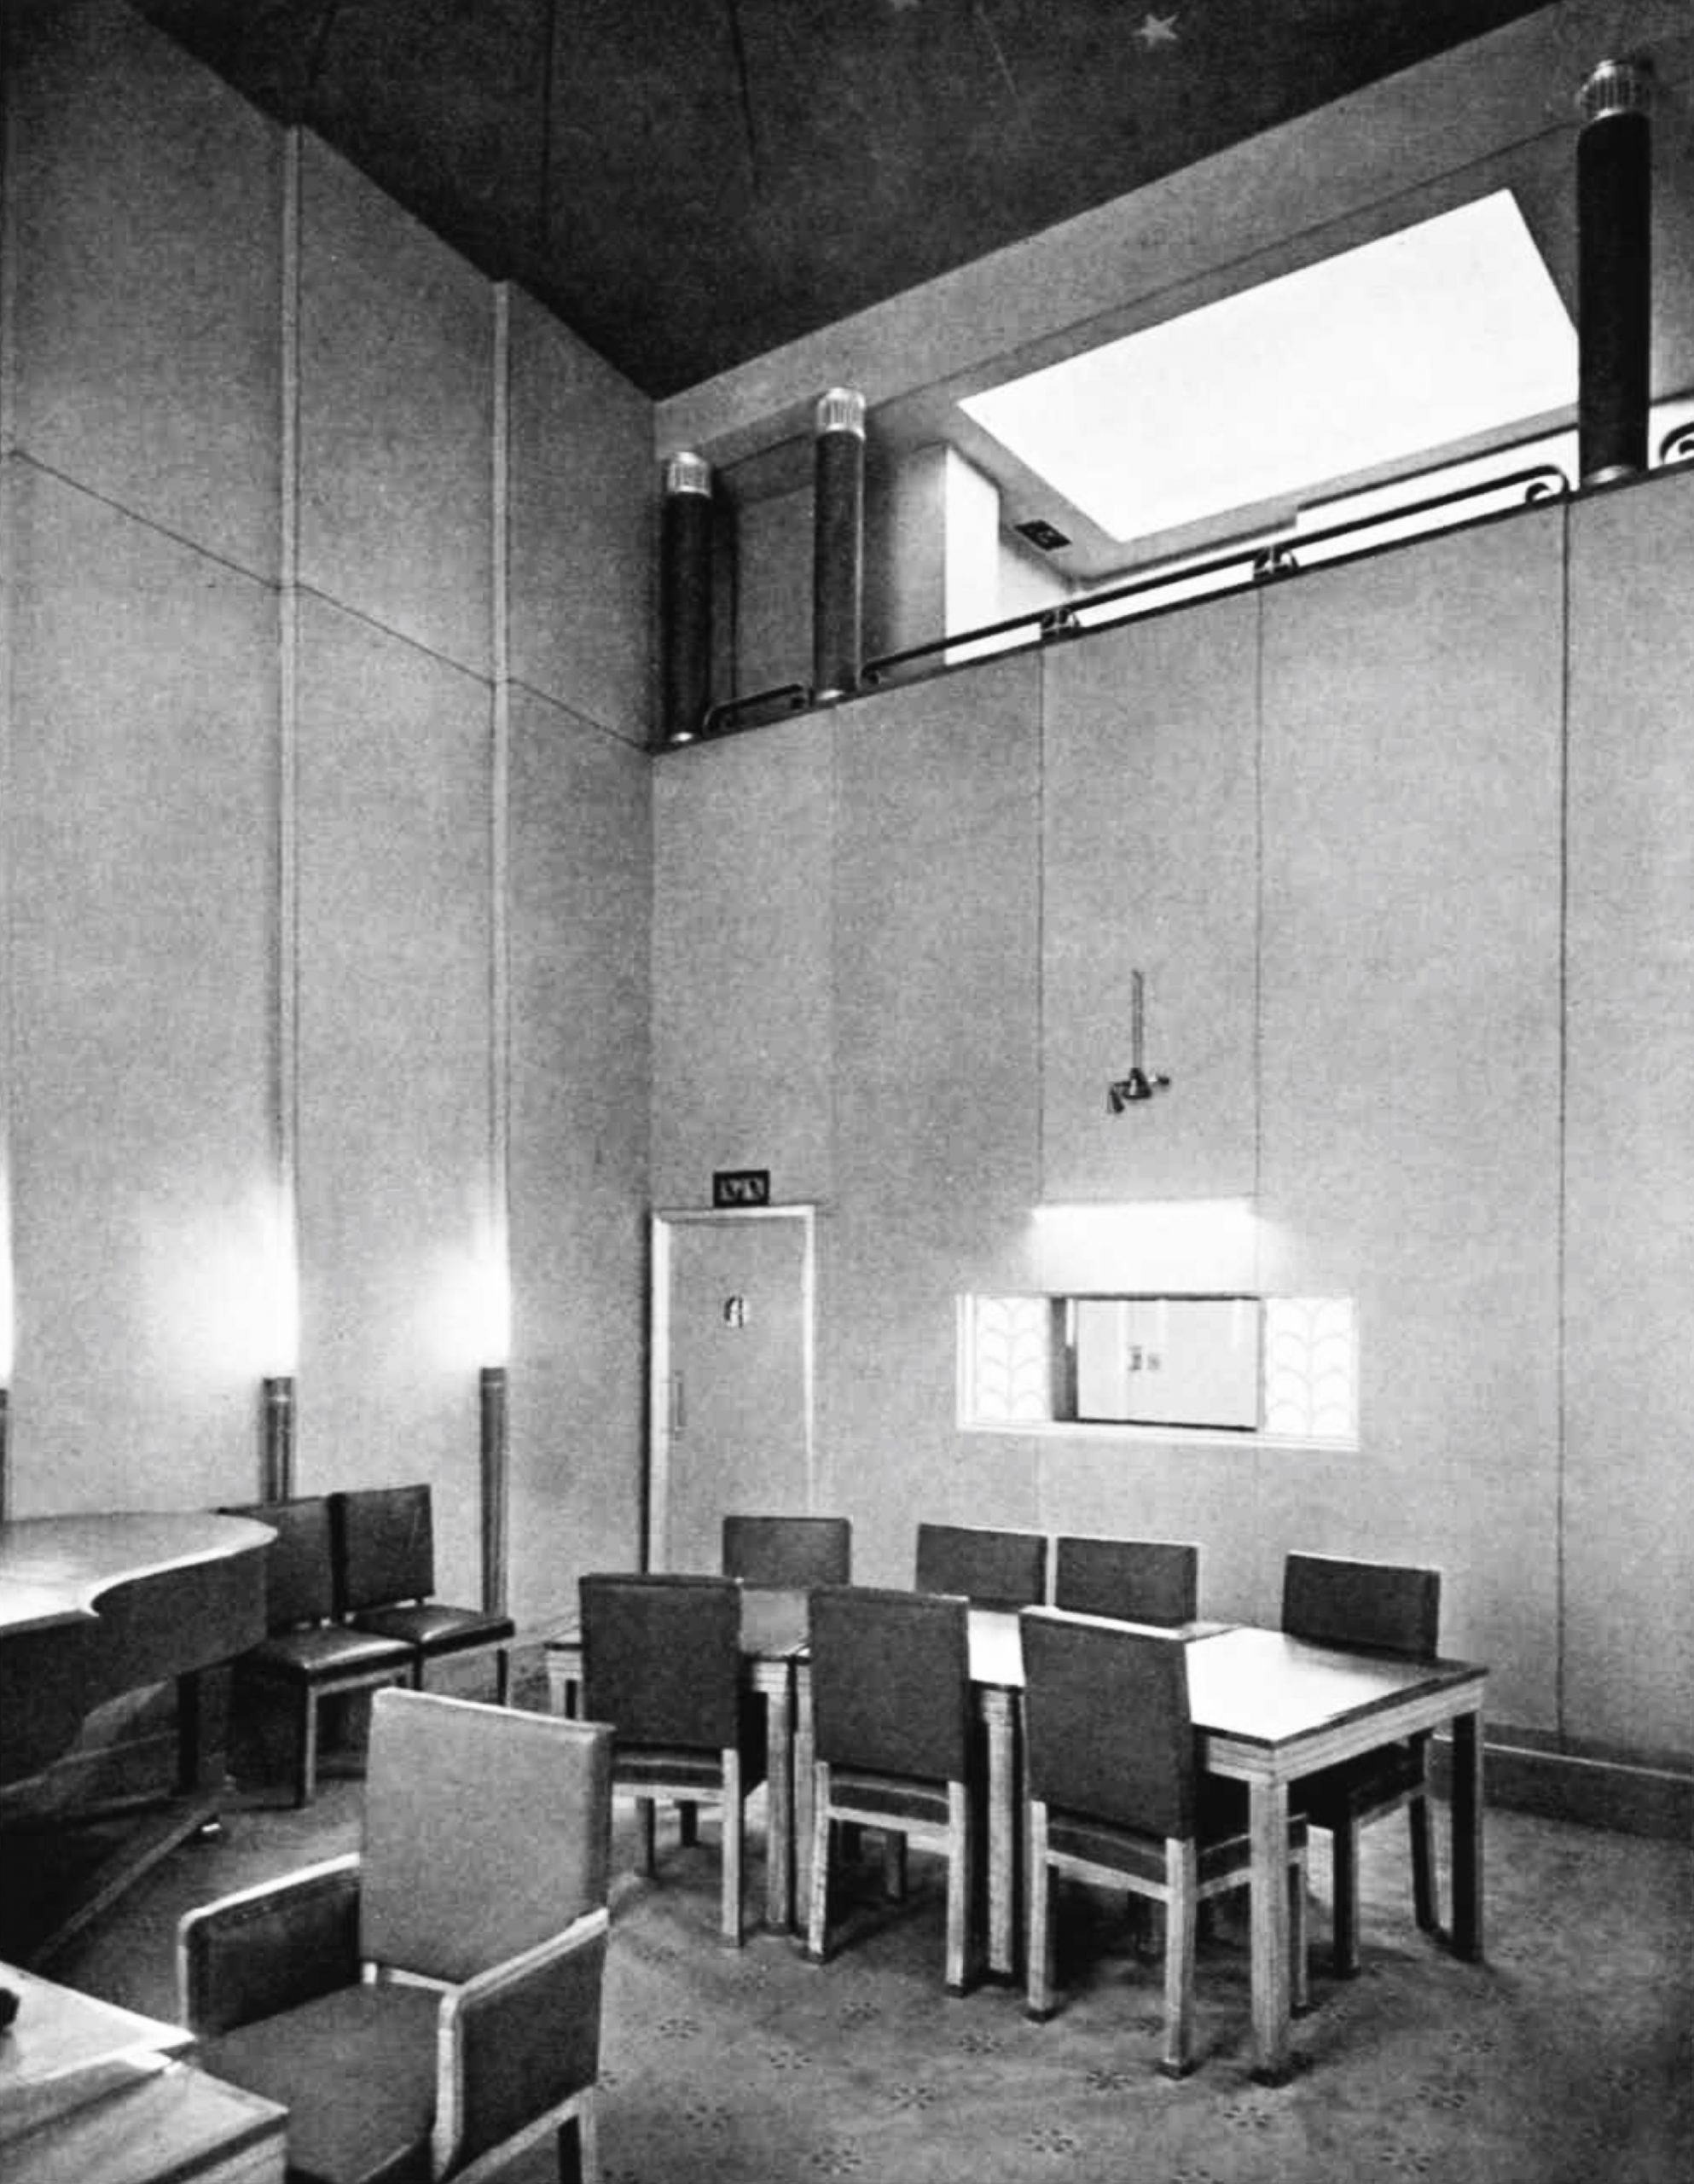 A tall room with a piano, desk and many chairs